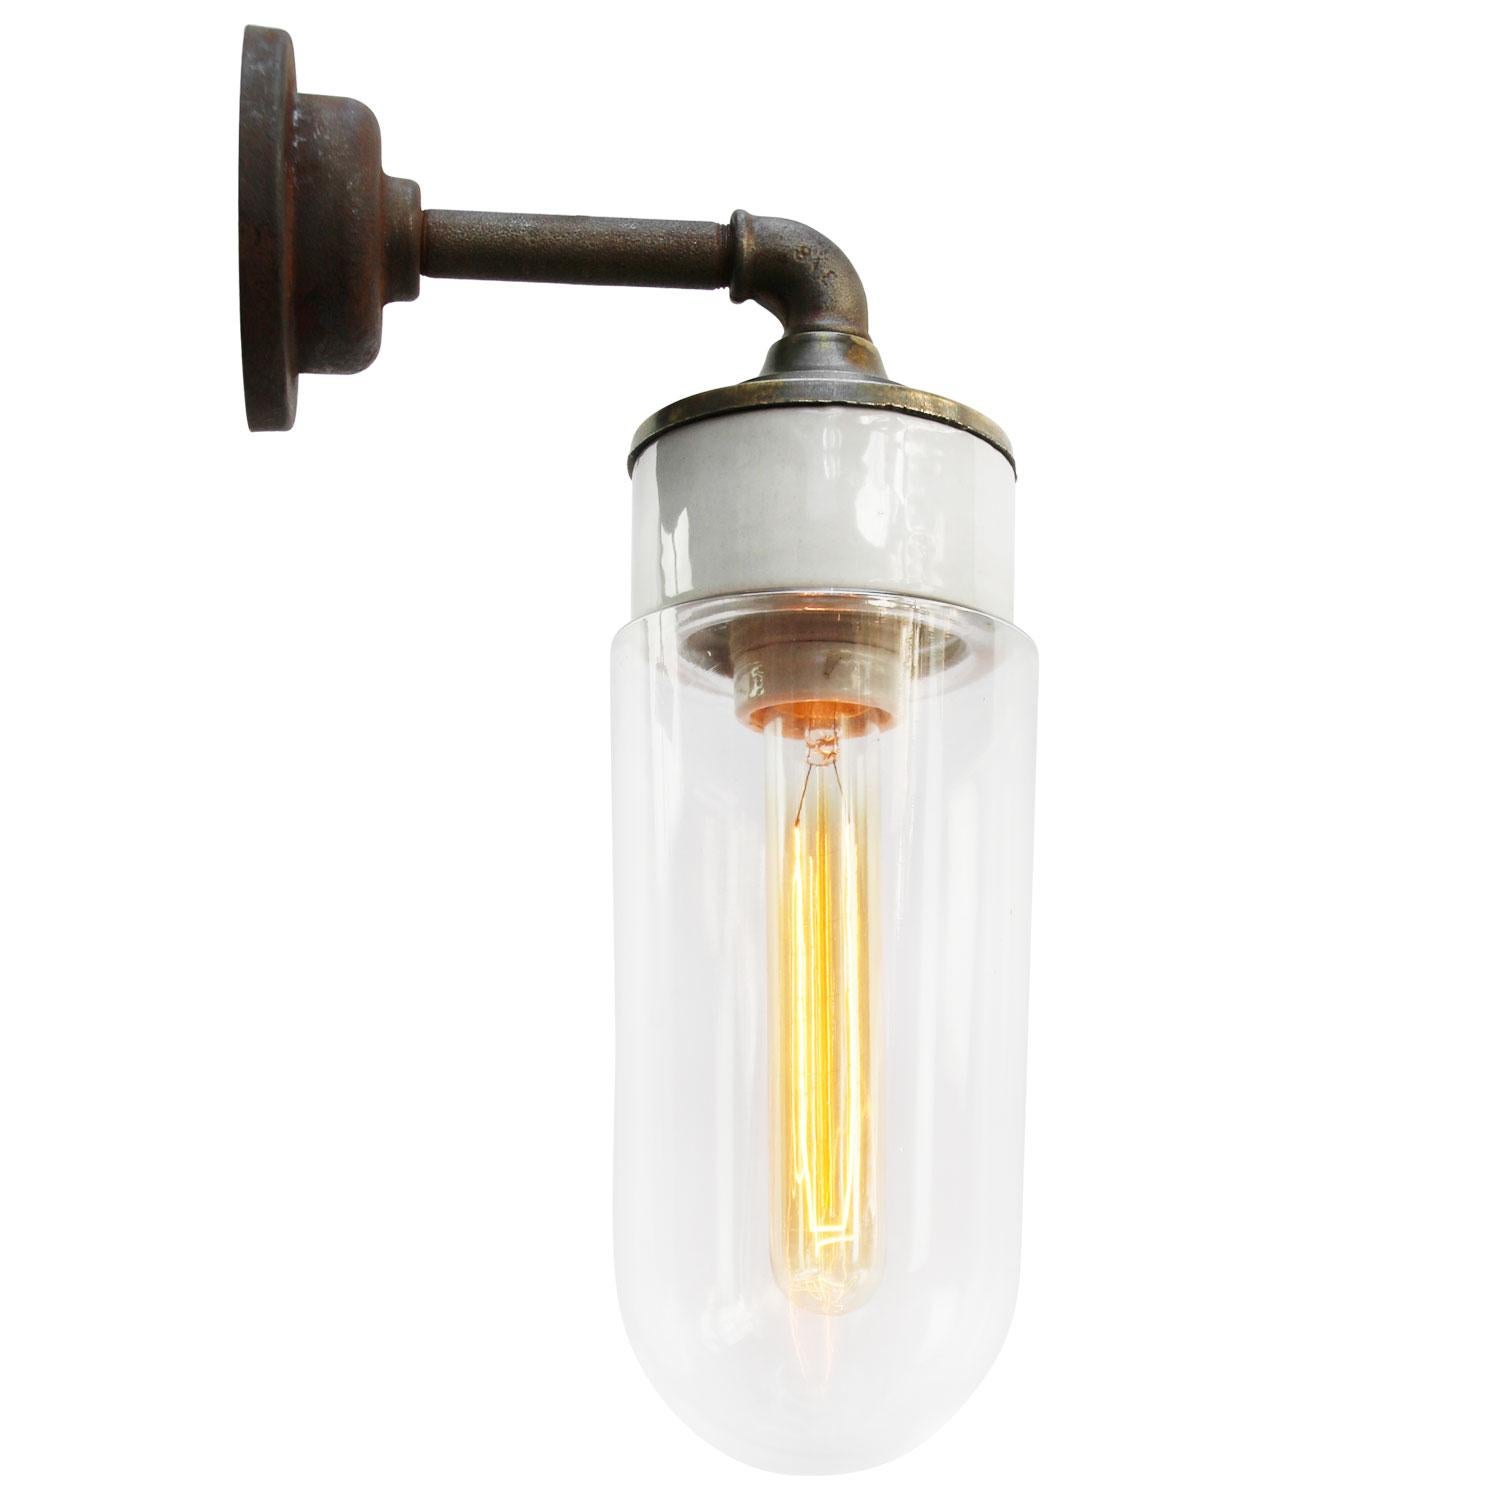 Porcelain Industrial wall lamp.
White porcelain, brass and cast iron
Clear glass.
2 conductors, no ground.

Diameter cast iron wall piece 10.5 cm / 4”.
2 holes to secure.

Weight: 2.10 kg / 4.6 lb

Priced per individual item. All lamps have been